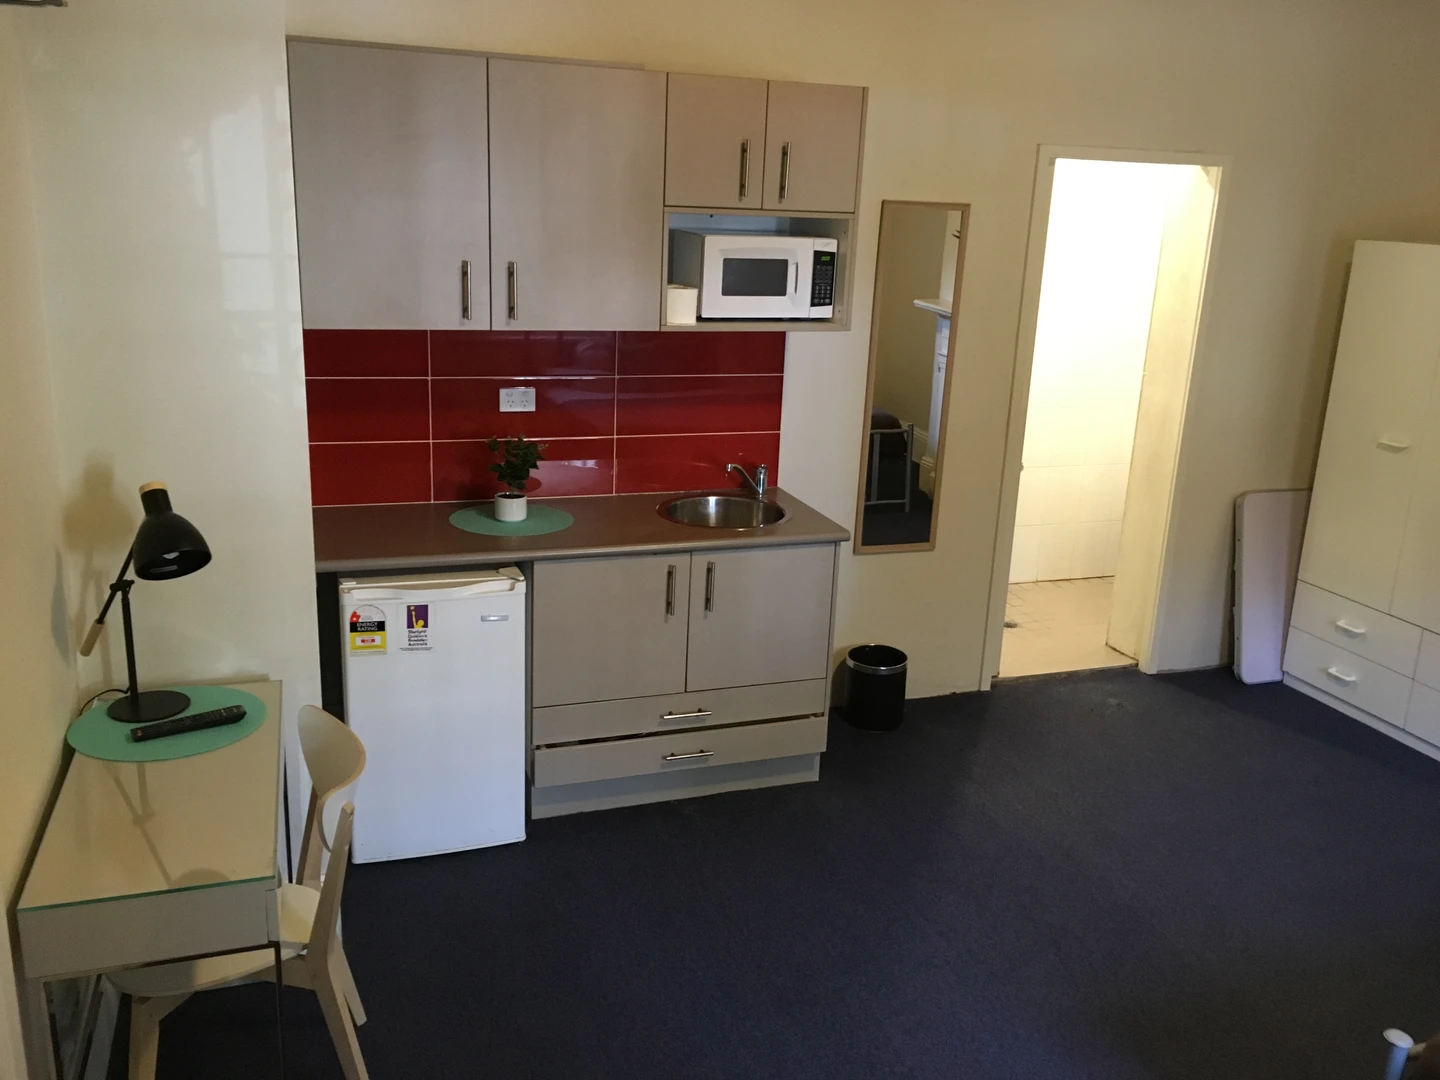 Renting rooms by the month in Sydney